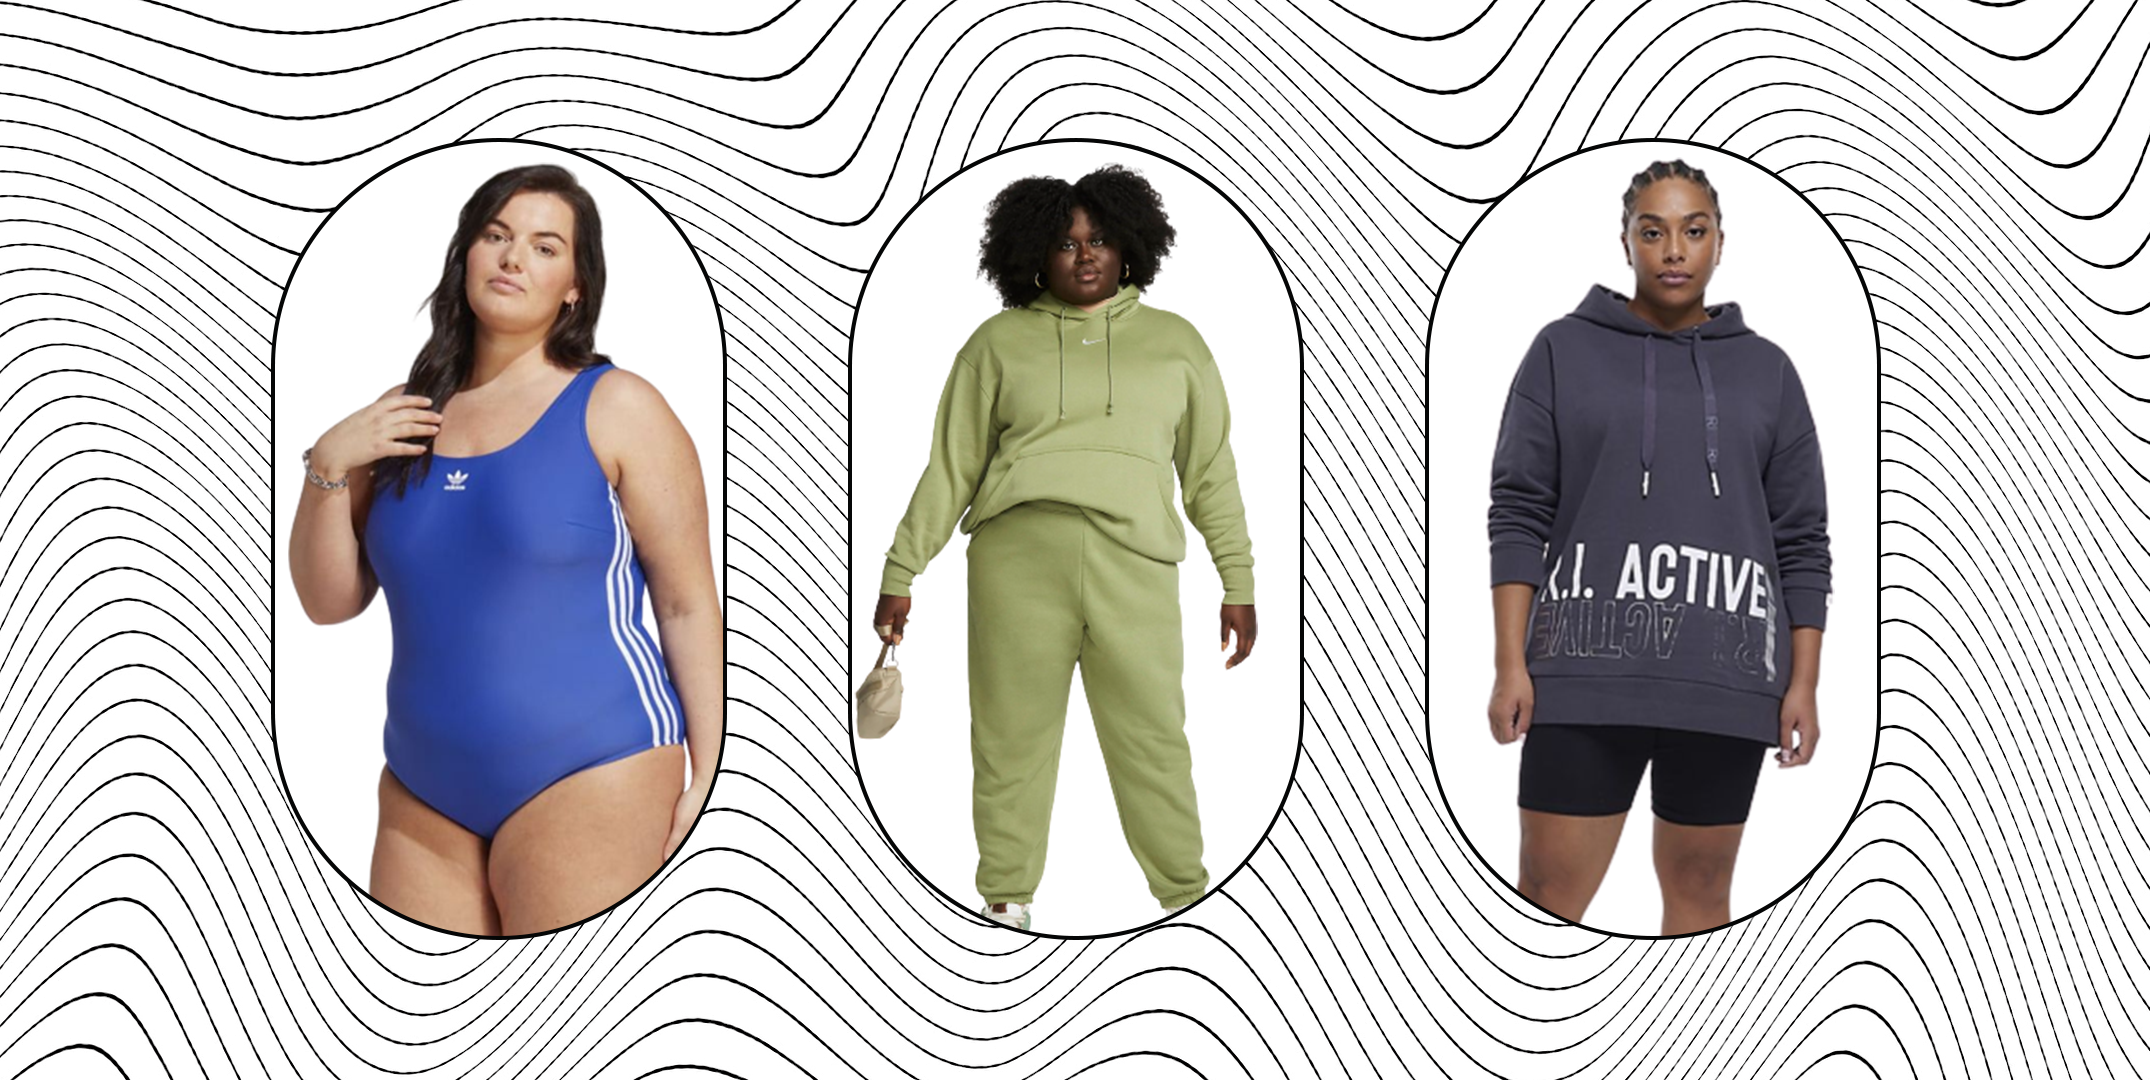 SIX WOMEN SIZES 2XL TO 4XL SHARE HOW THE ACTIVEWEAR INDUSTRY IS